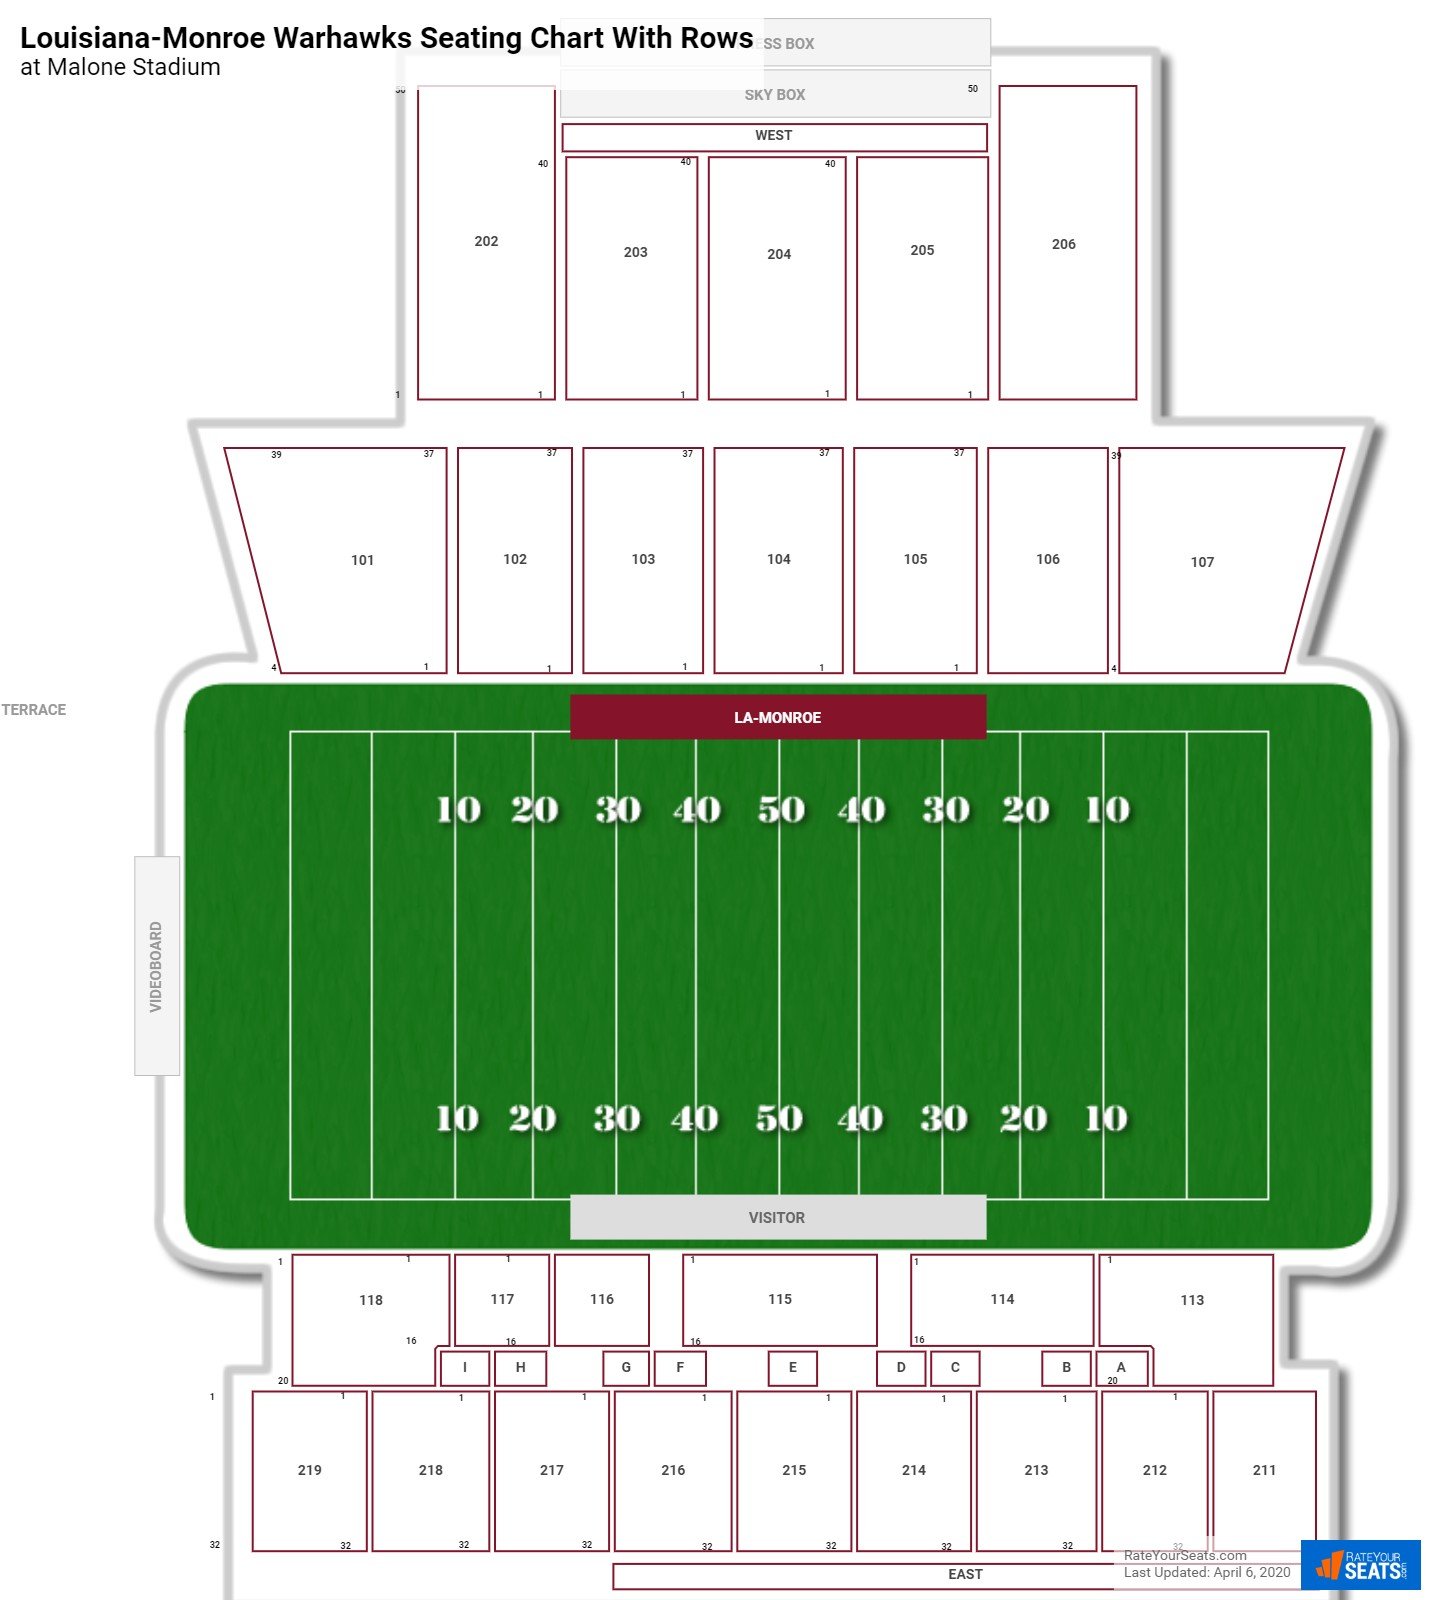 Malone Stadium seating chart with row numbers